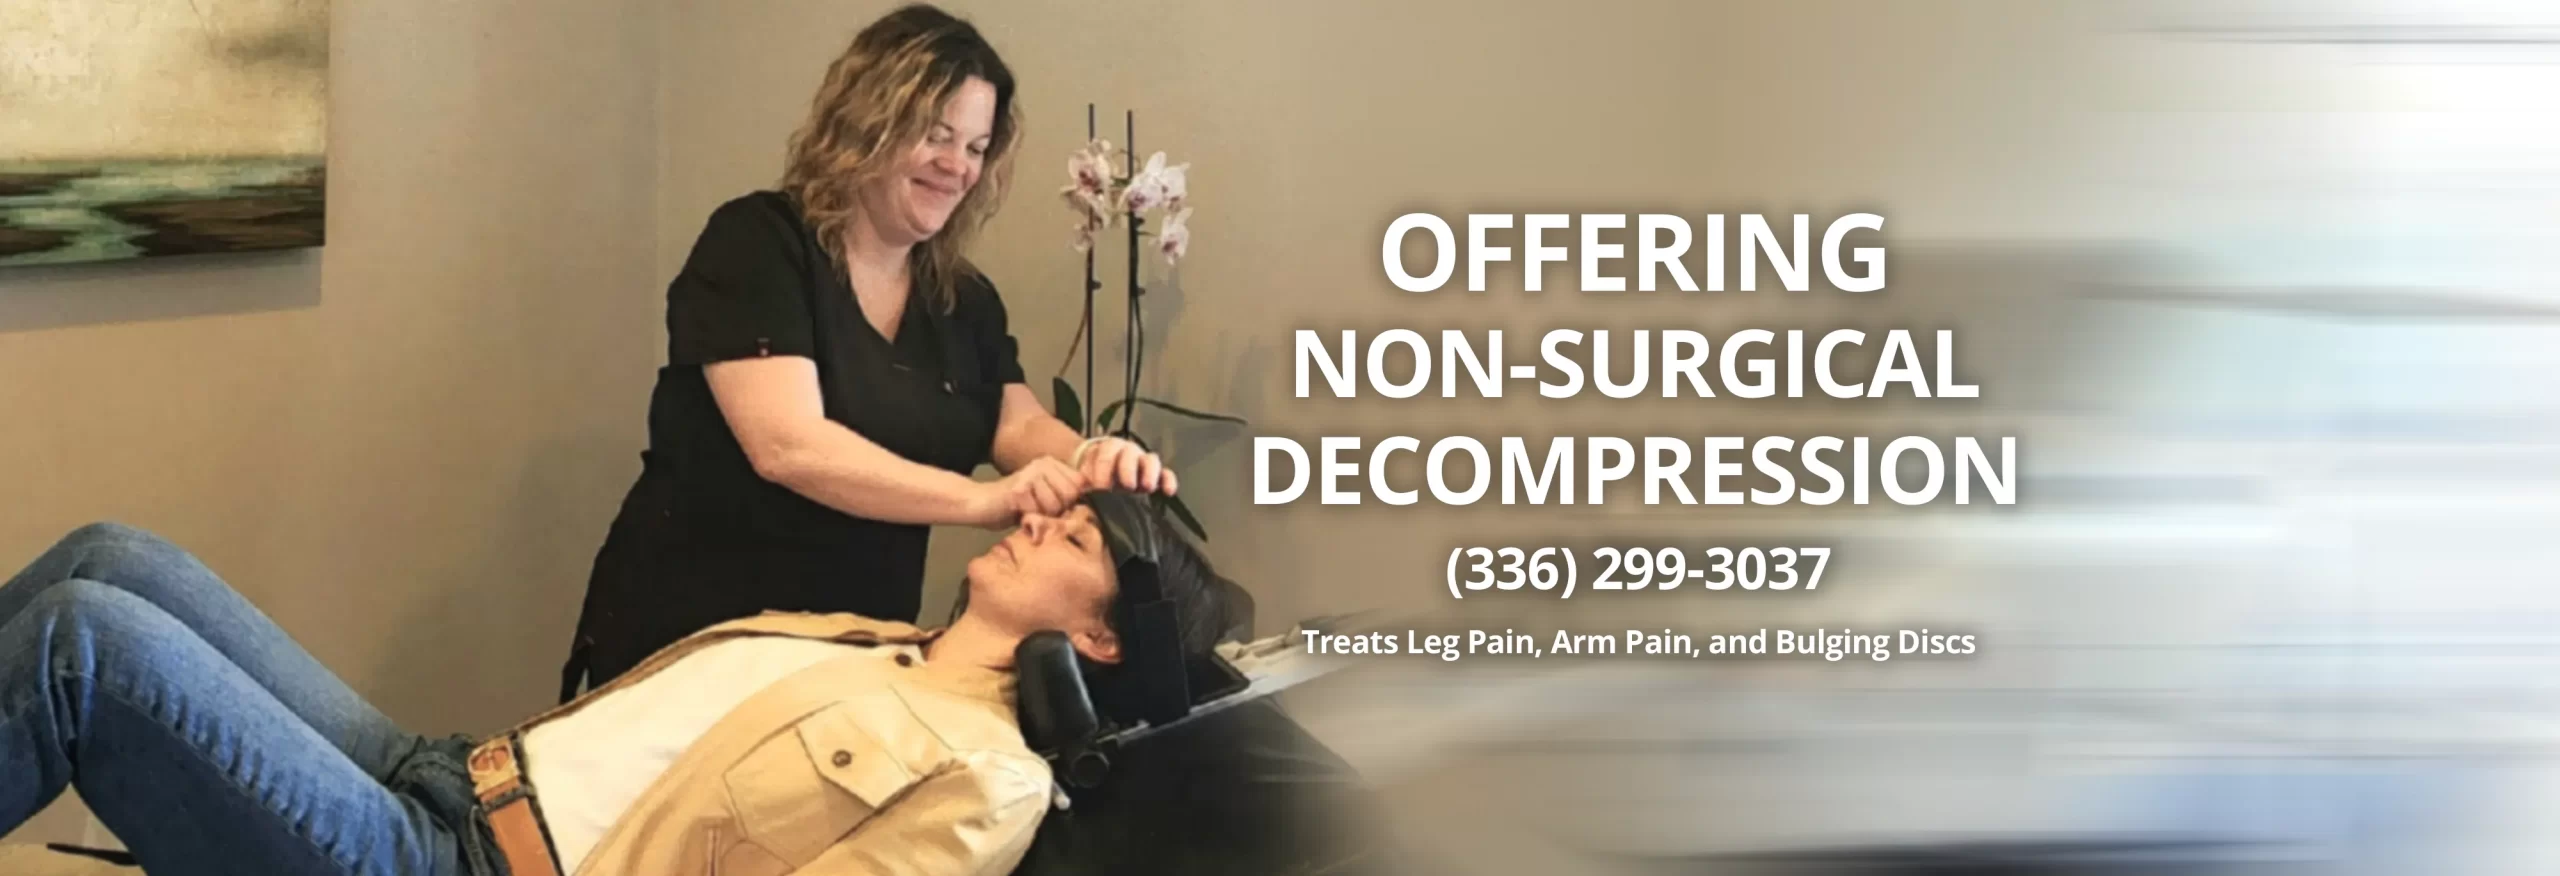 Chiropractic Greensboro NC Offering Spinal Decompression